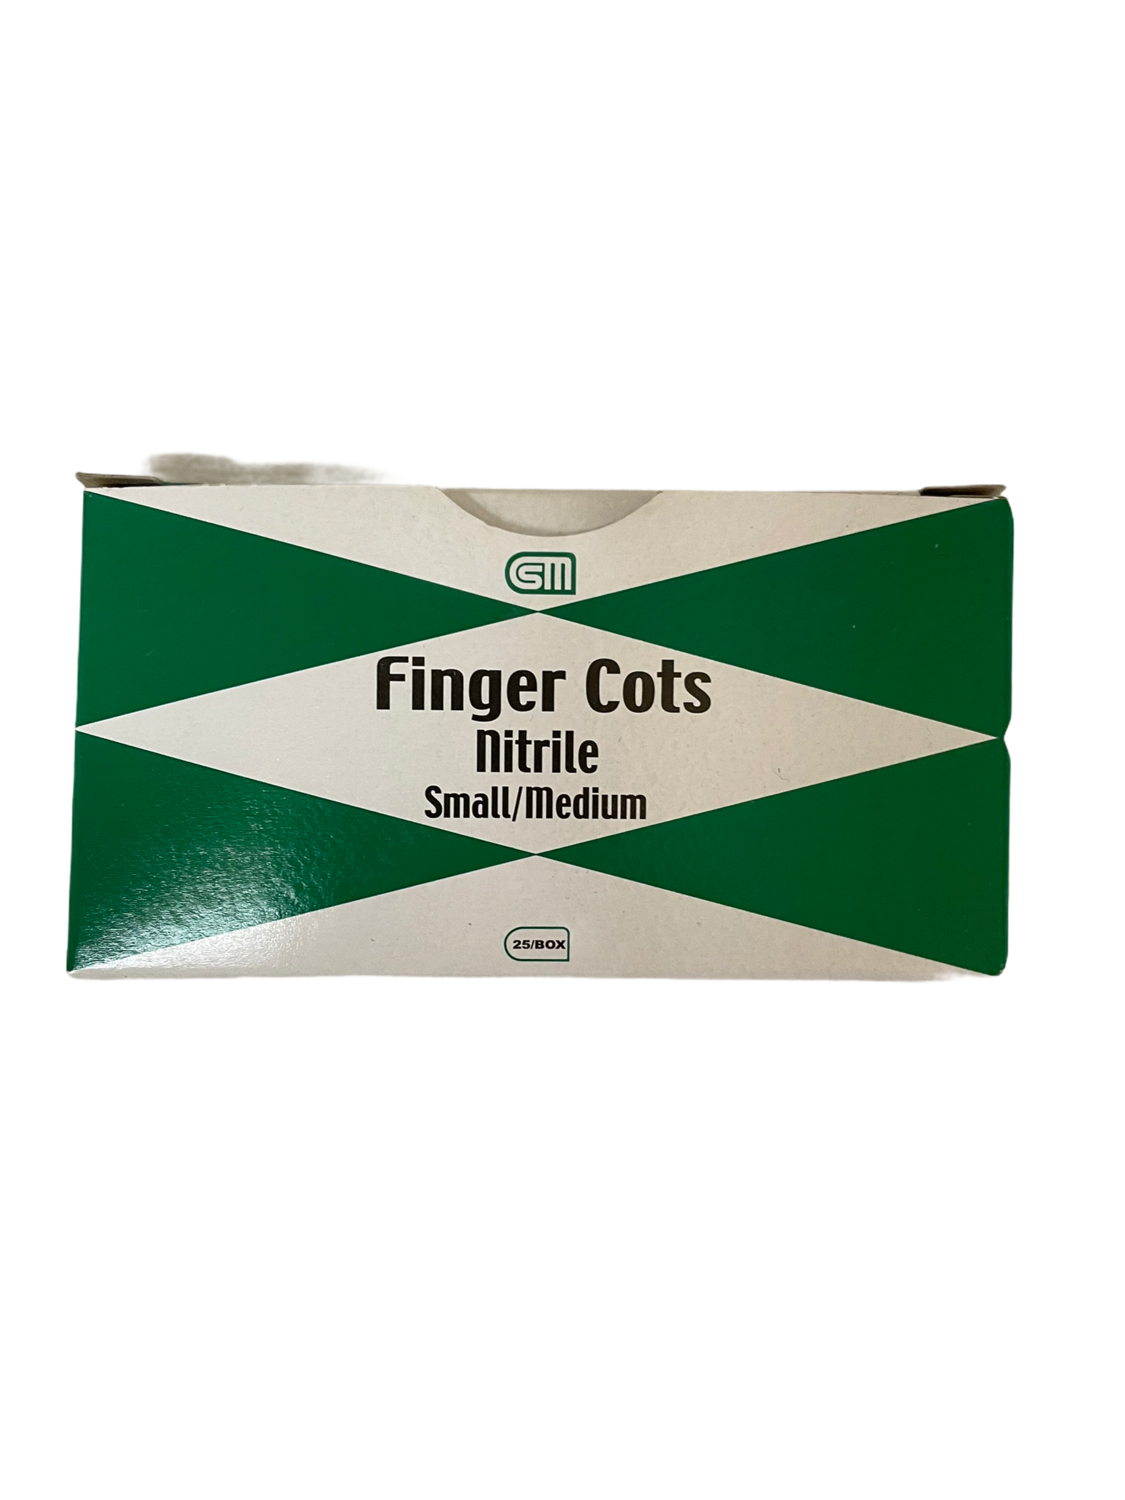 Finger Cots - Small/Medium - Nitrile - Certified 235-070 - 25/box Safety NJ